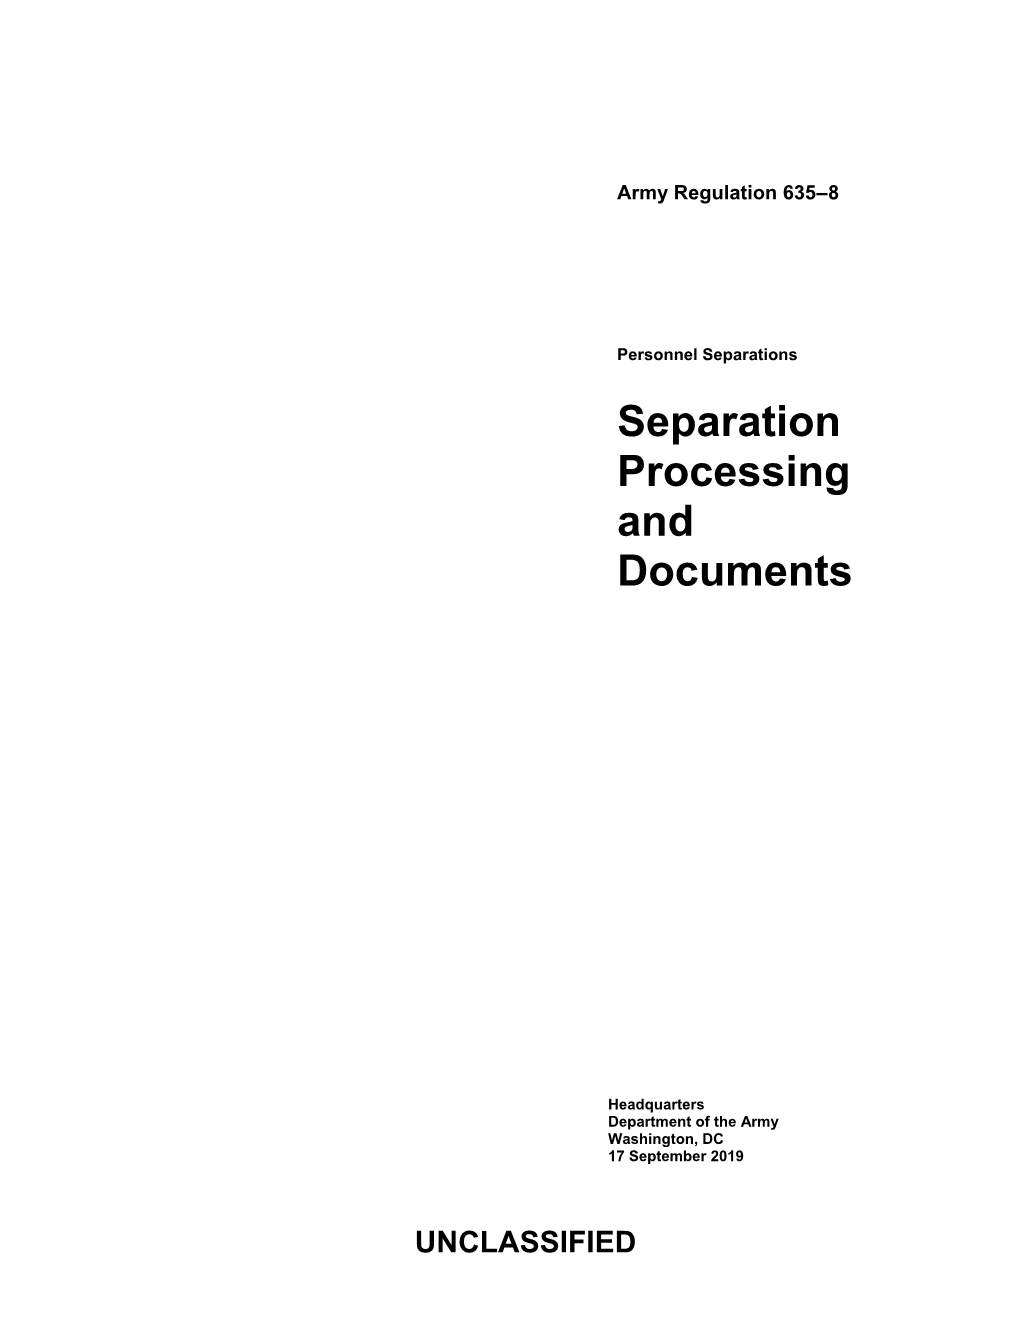 Separation Processing and Documents